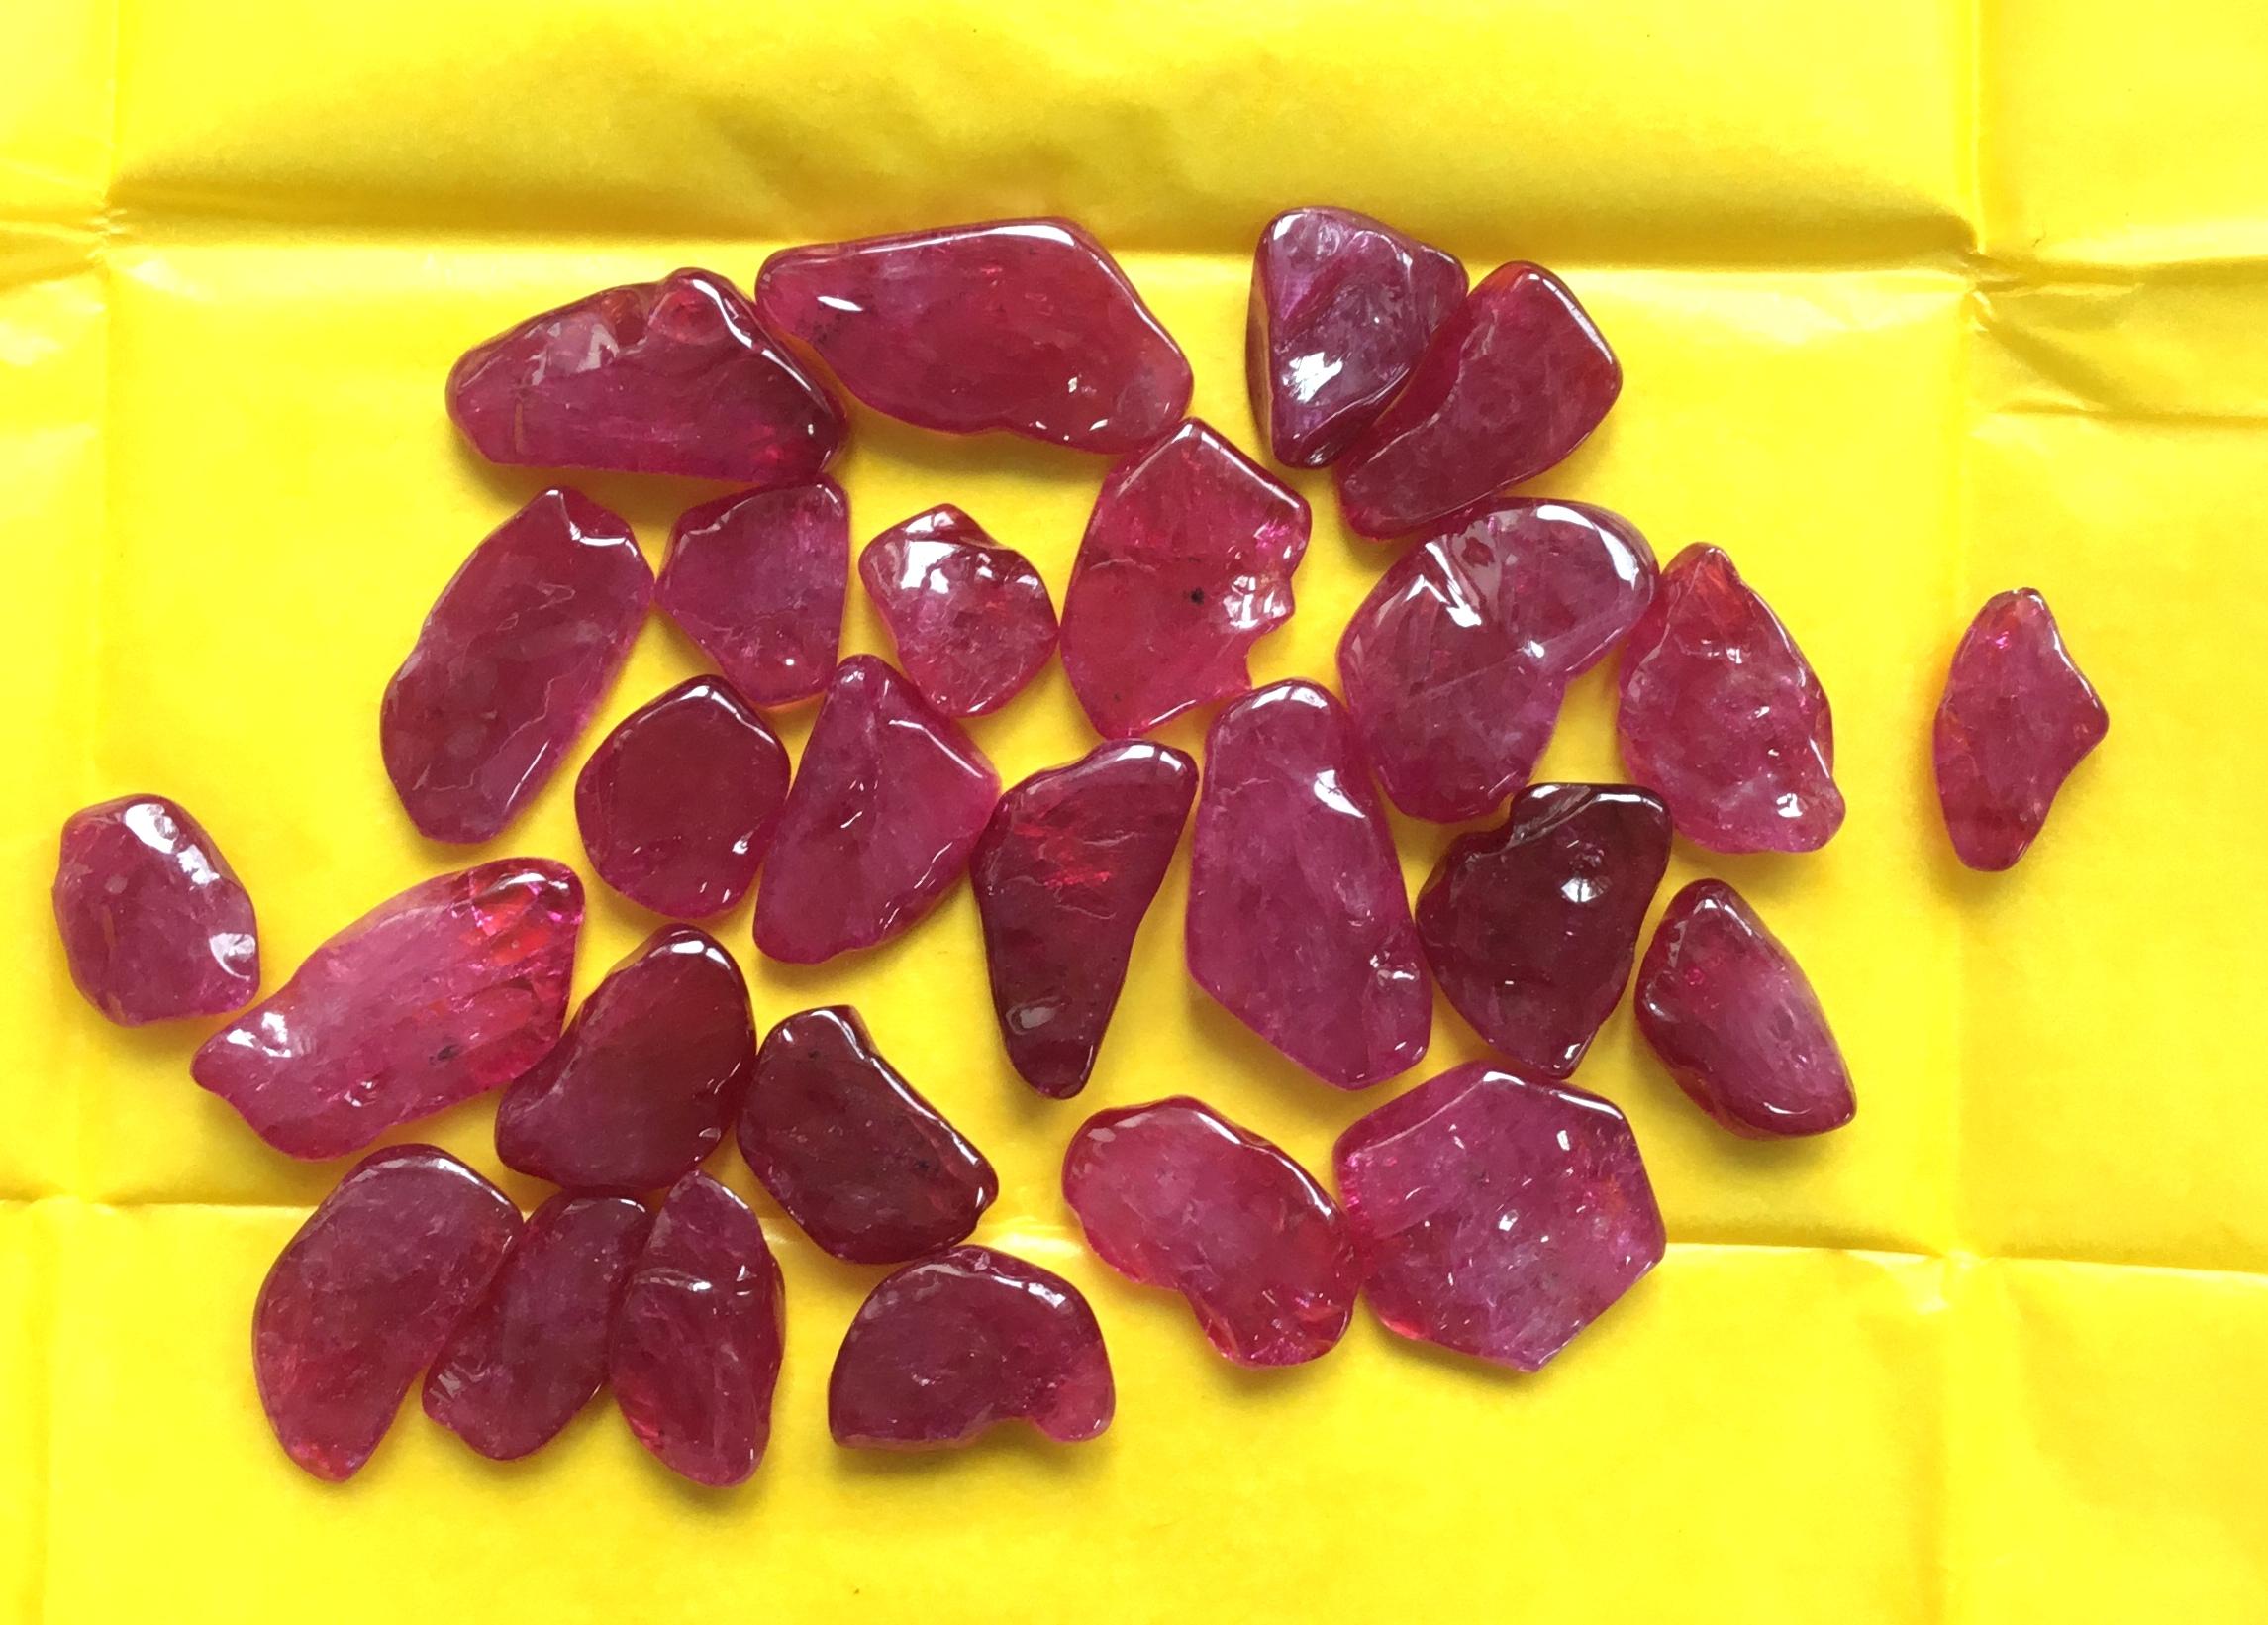 Top Quality Mozambique Ruby Natural Plain Tumble Gemstone For Jewelry Making 
Loose Ruby Gemstone Lot
Size : 13x10 To 15x22 MM Beads
Weight : 358.90 Carats
Quantity - 27 Pieces 